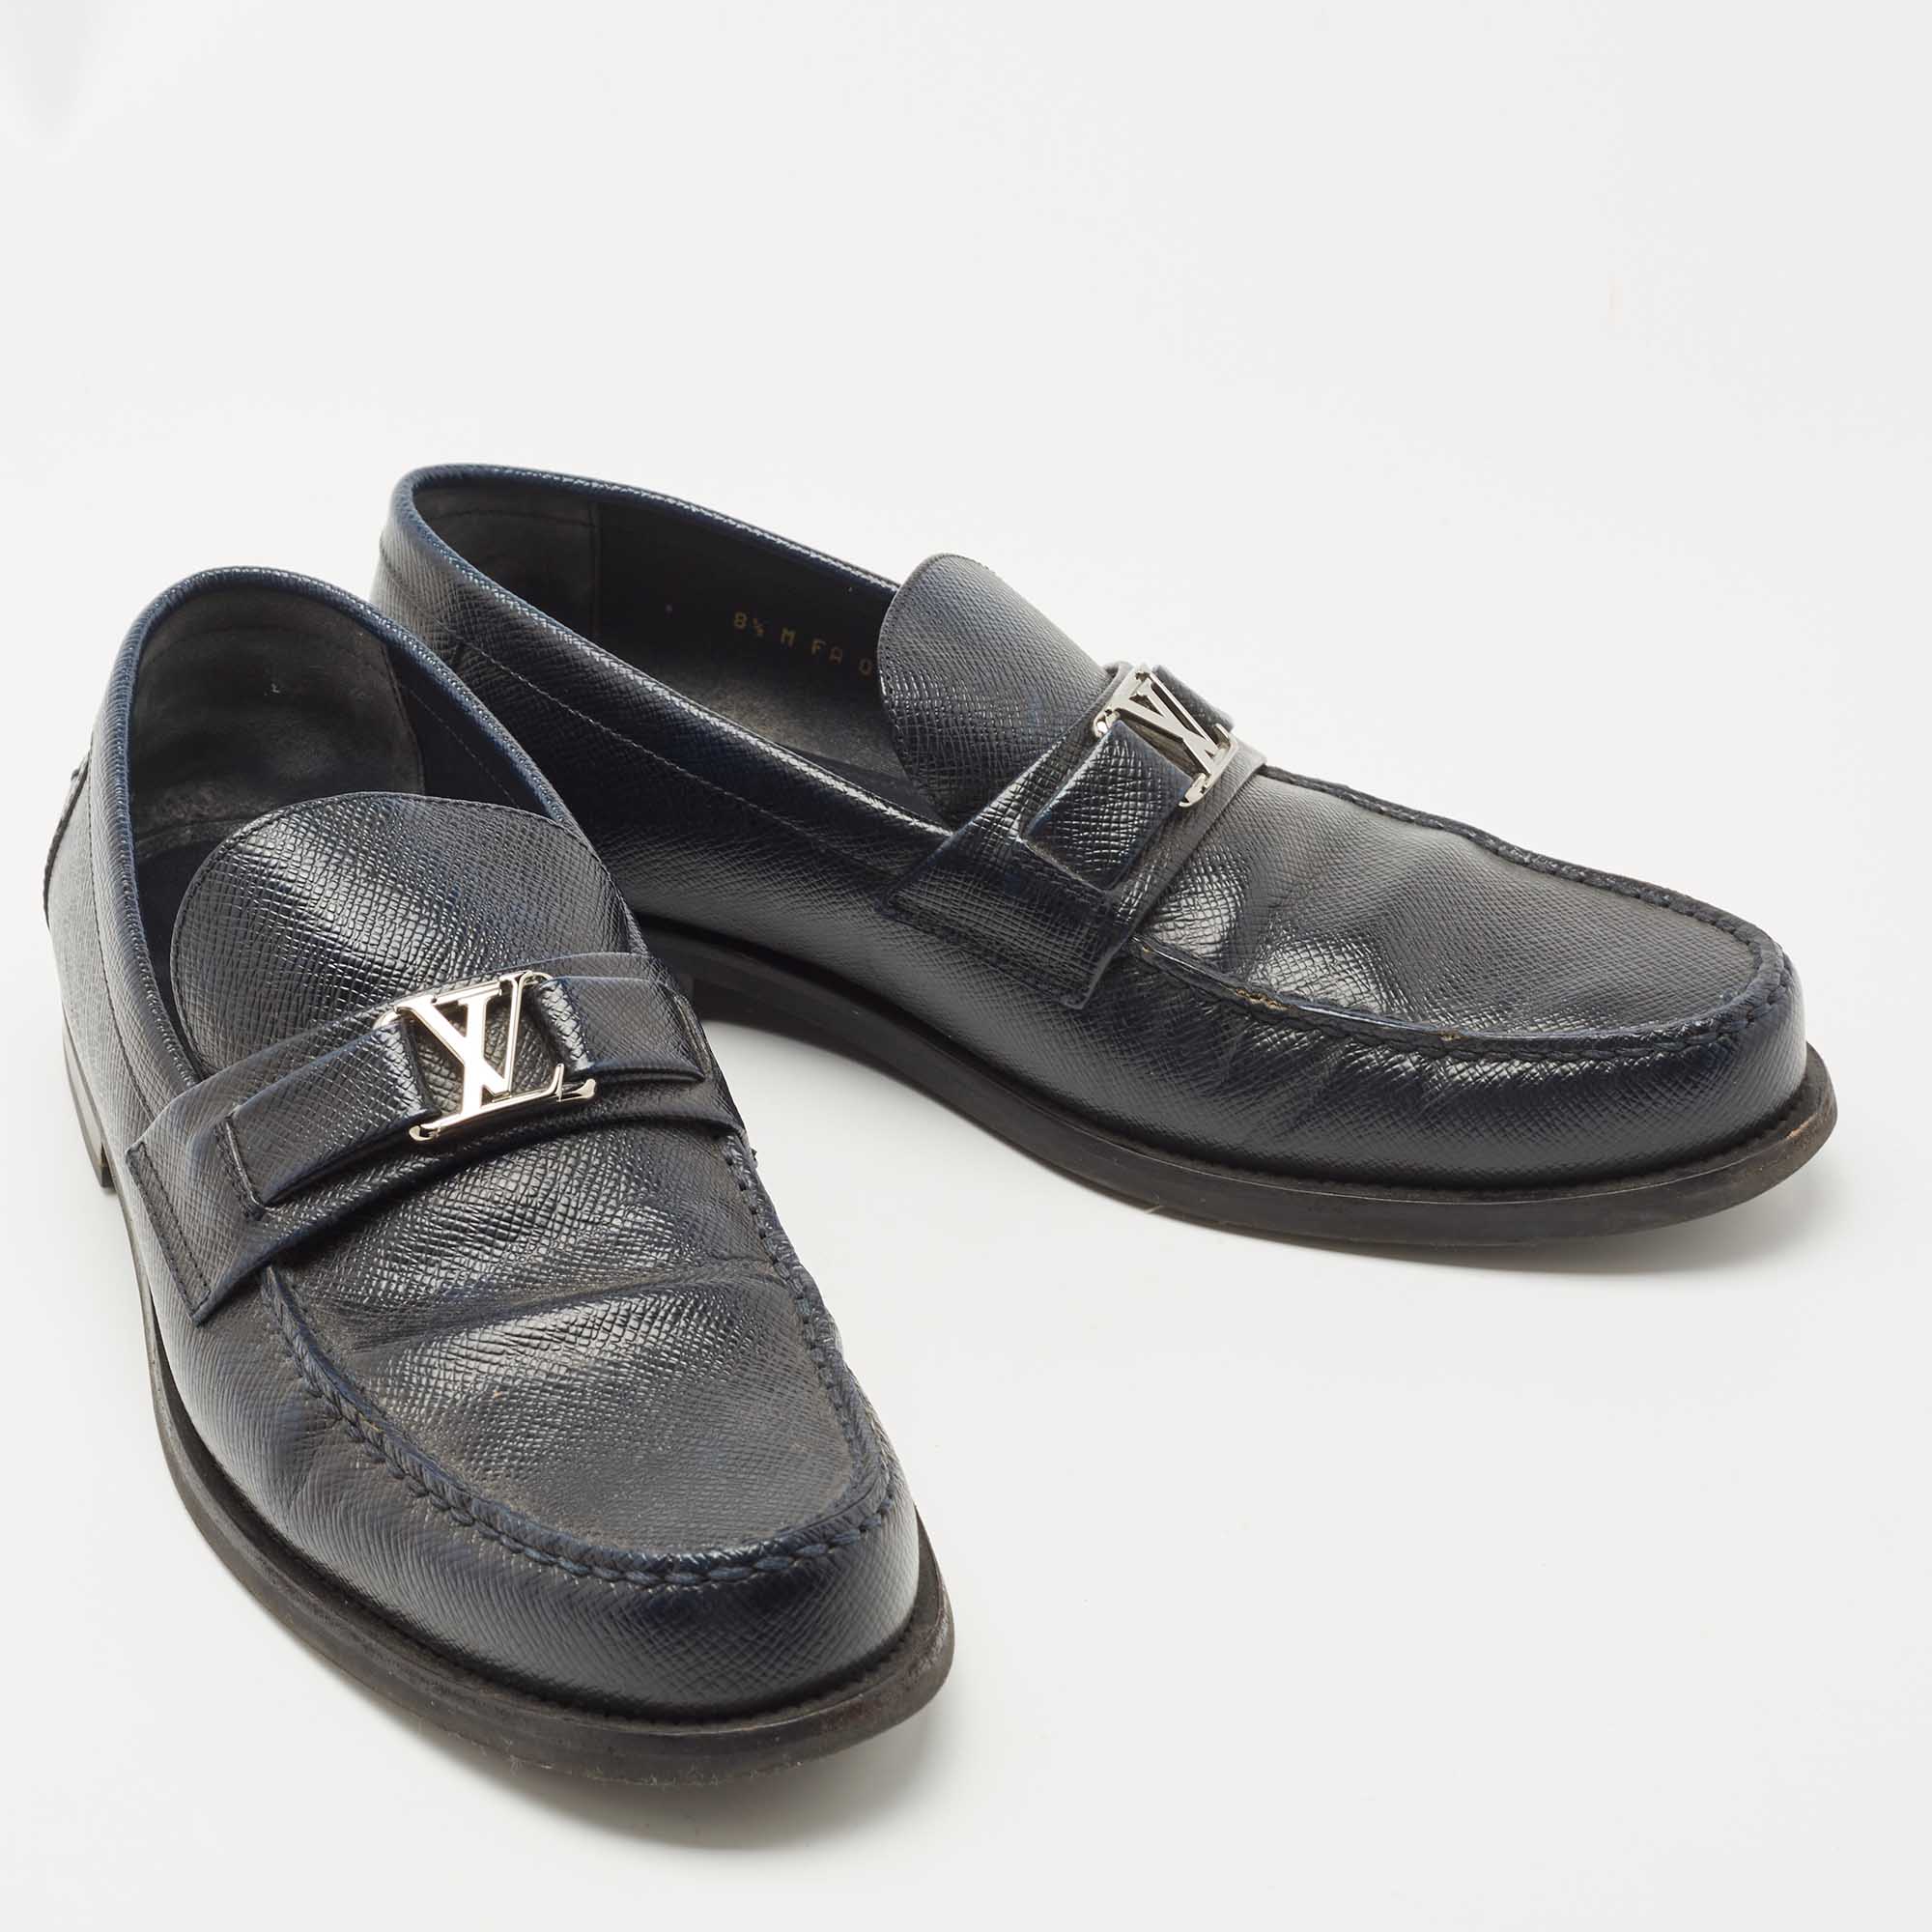 Louis Vuitton Navy Blue Leather Major Loafers Size 43.5 لوي فيتون